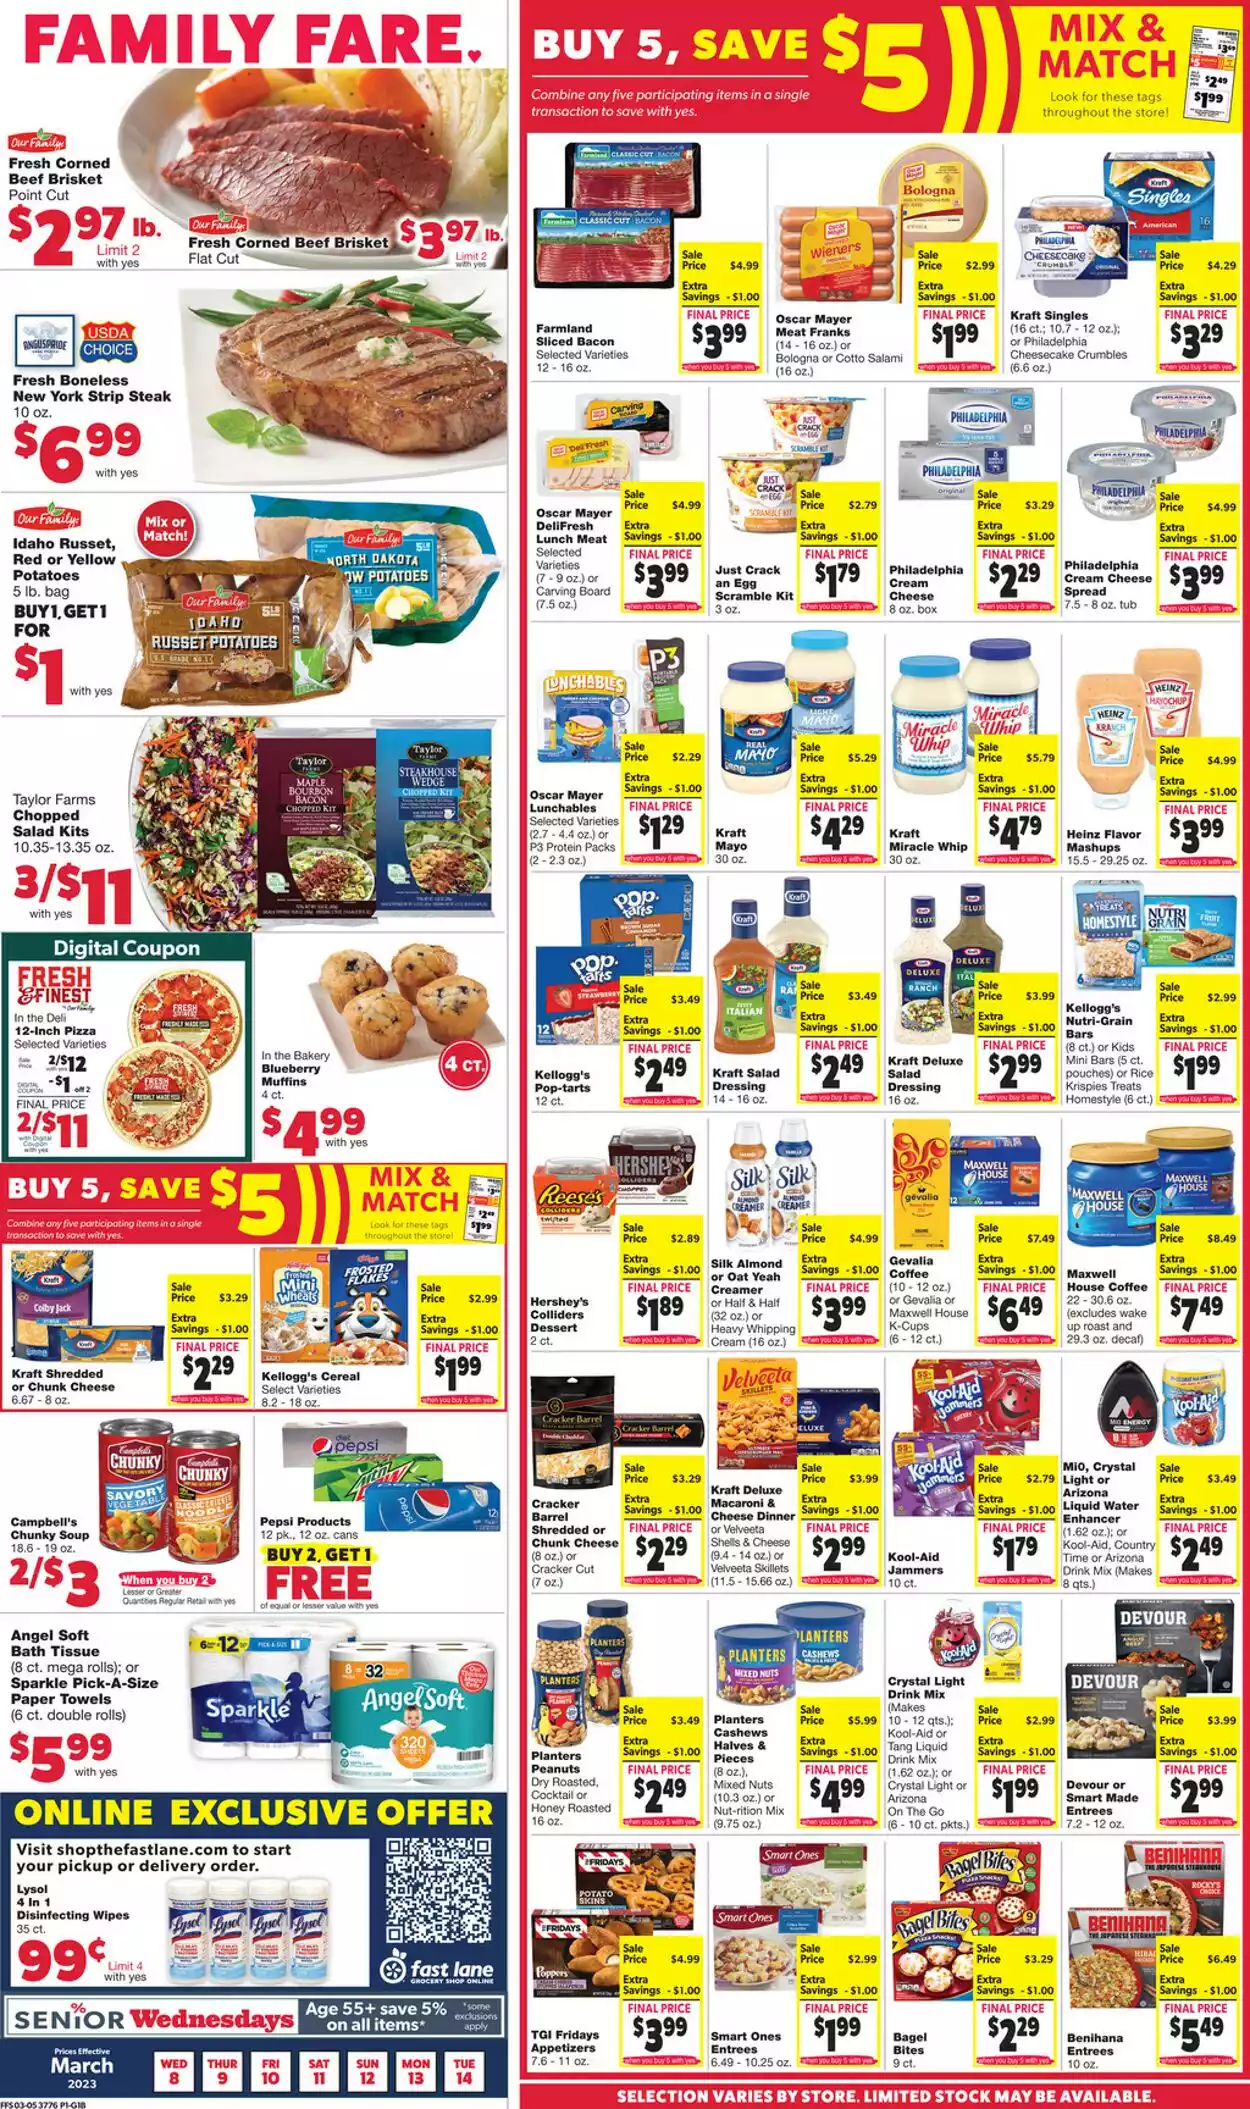 Family Fare Weekly Ad Preview for March 22 - 28, 2023 1